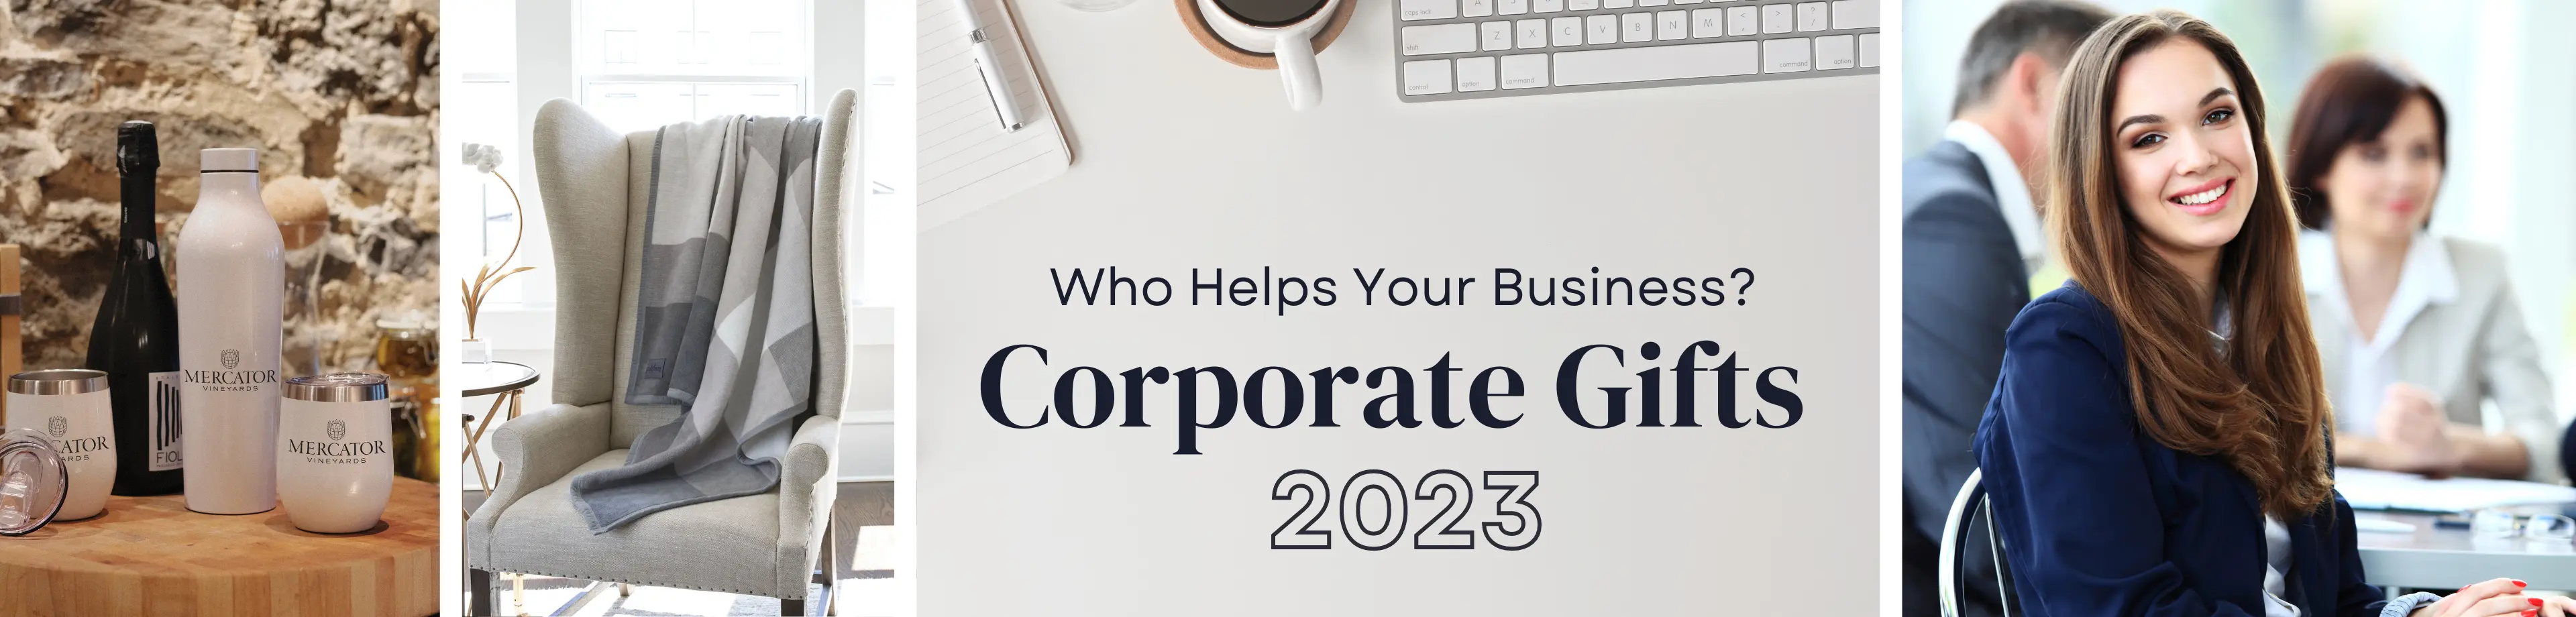 Corporate Gifts 2023 - Need great gift ideas for your clients or employees? Click to browse Canada's best selection of company branded gifts!